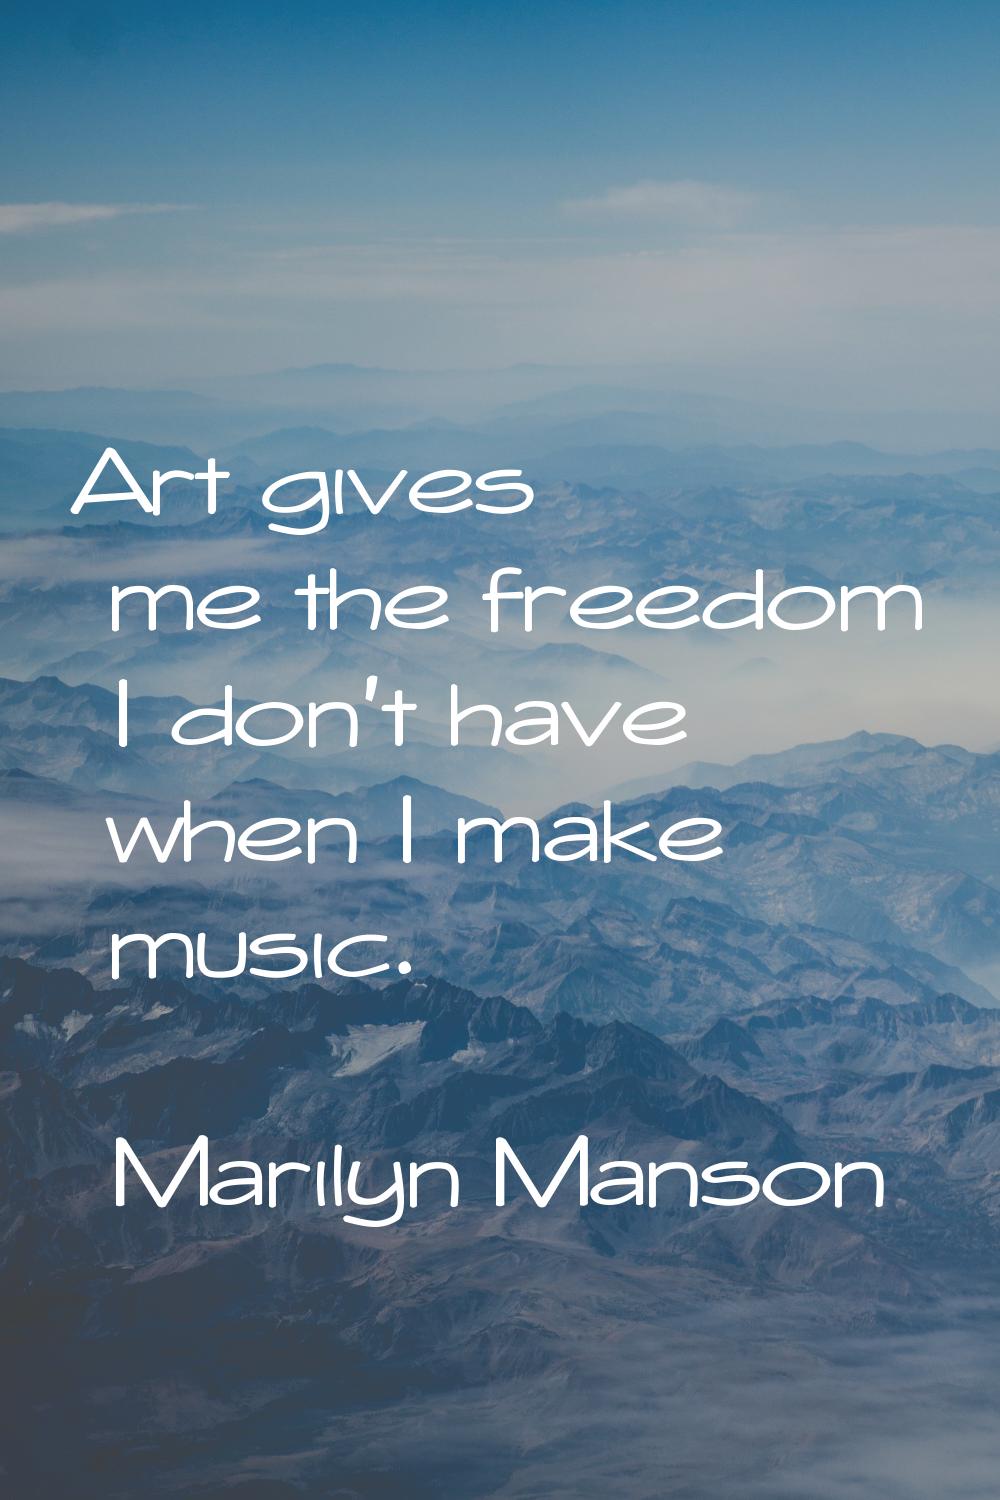 Art gives me the freedom I don't have when I make music.